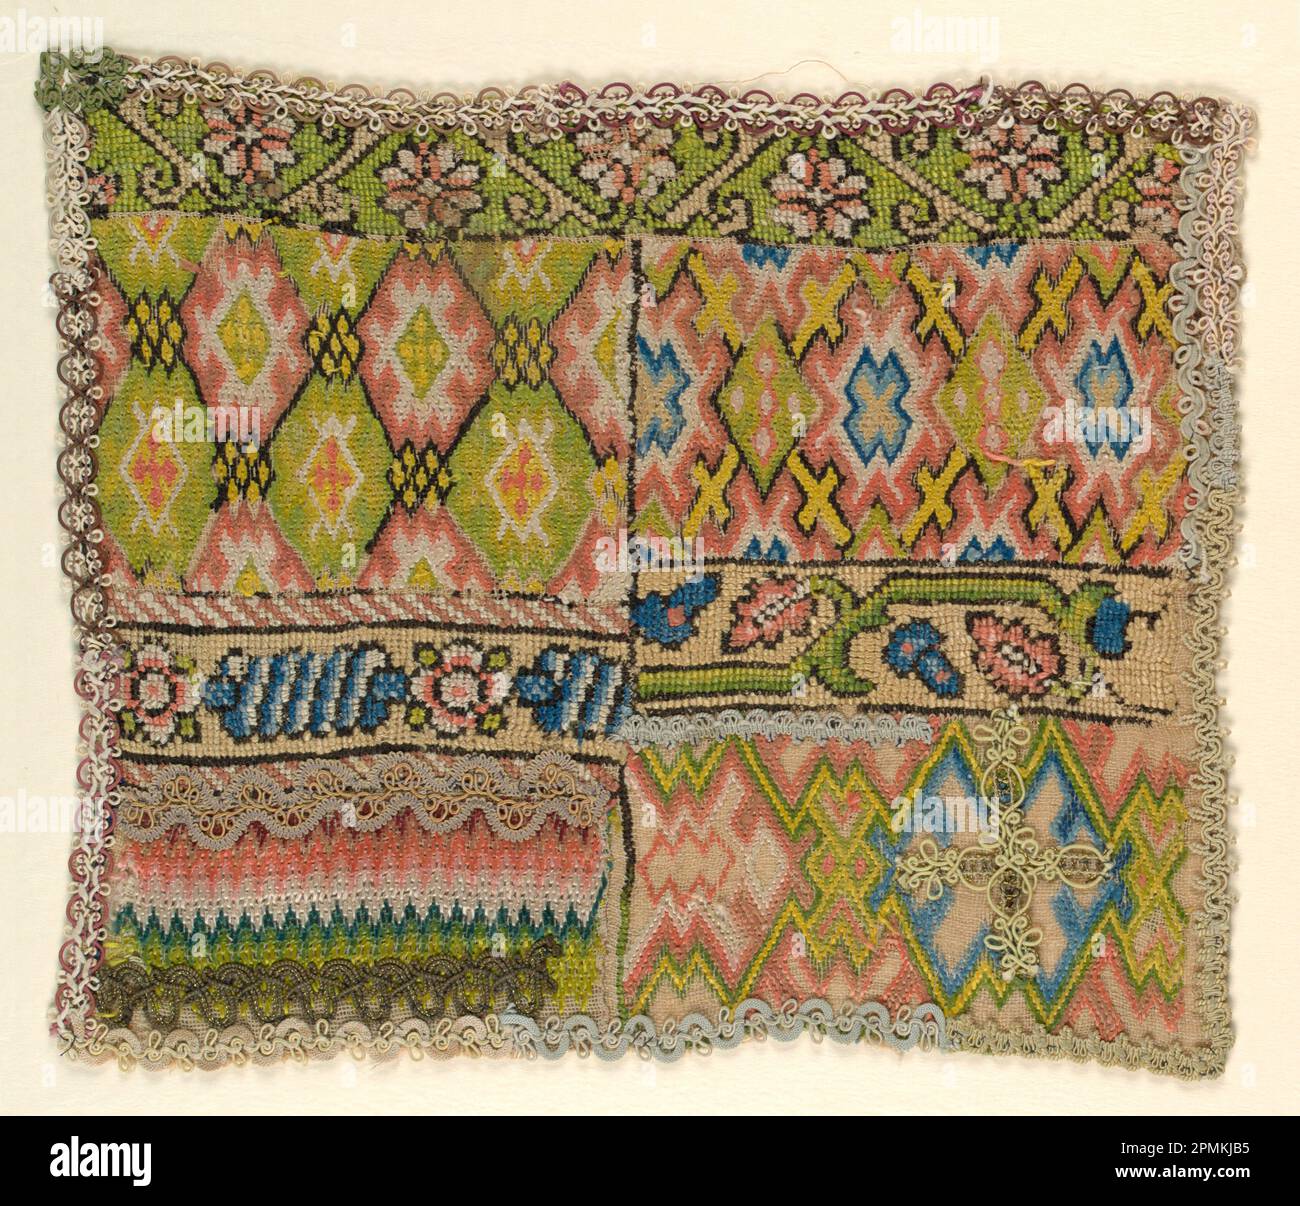 Sampler (Germany); silk and metal thread embroidery, linen foundation; Warp x Weft: 34 x 41 cm (13 3/8 x 16 1/8 in.); Bequest of Mrs. Henry E. Coe; 1941-69-110 Stock Photo